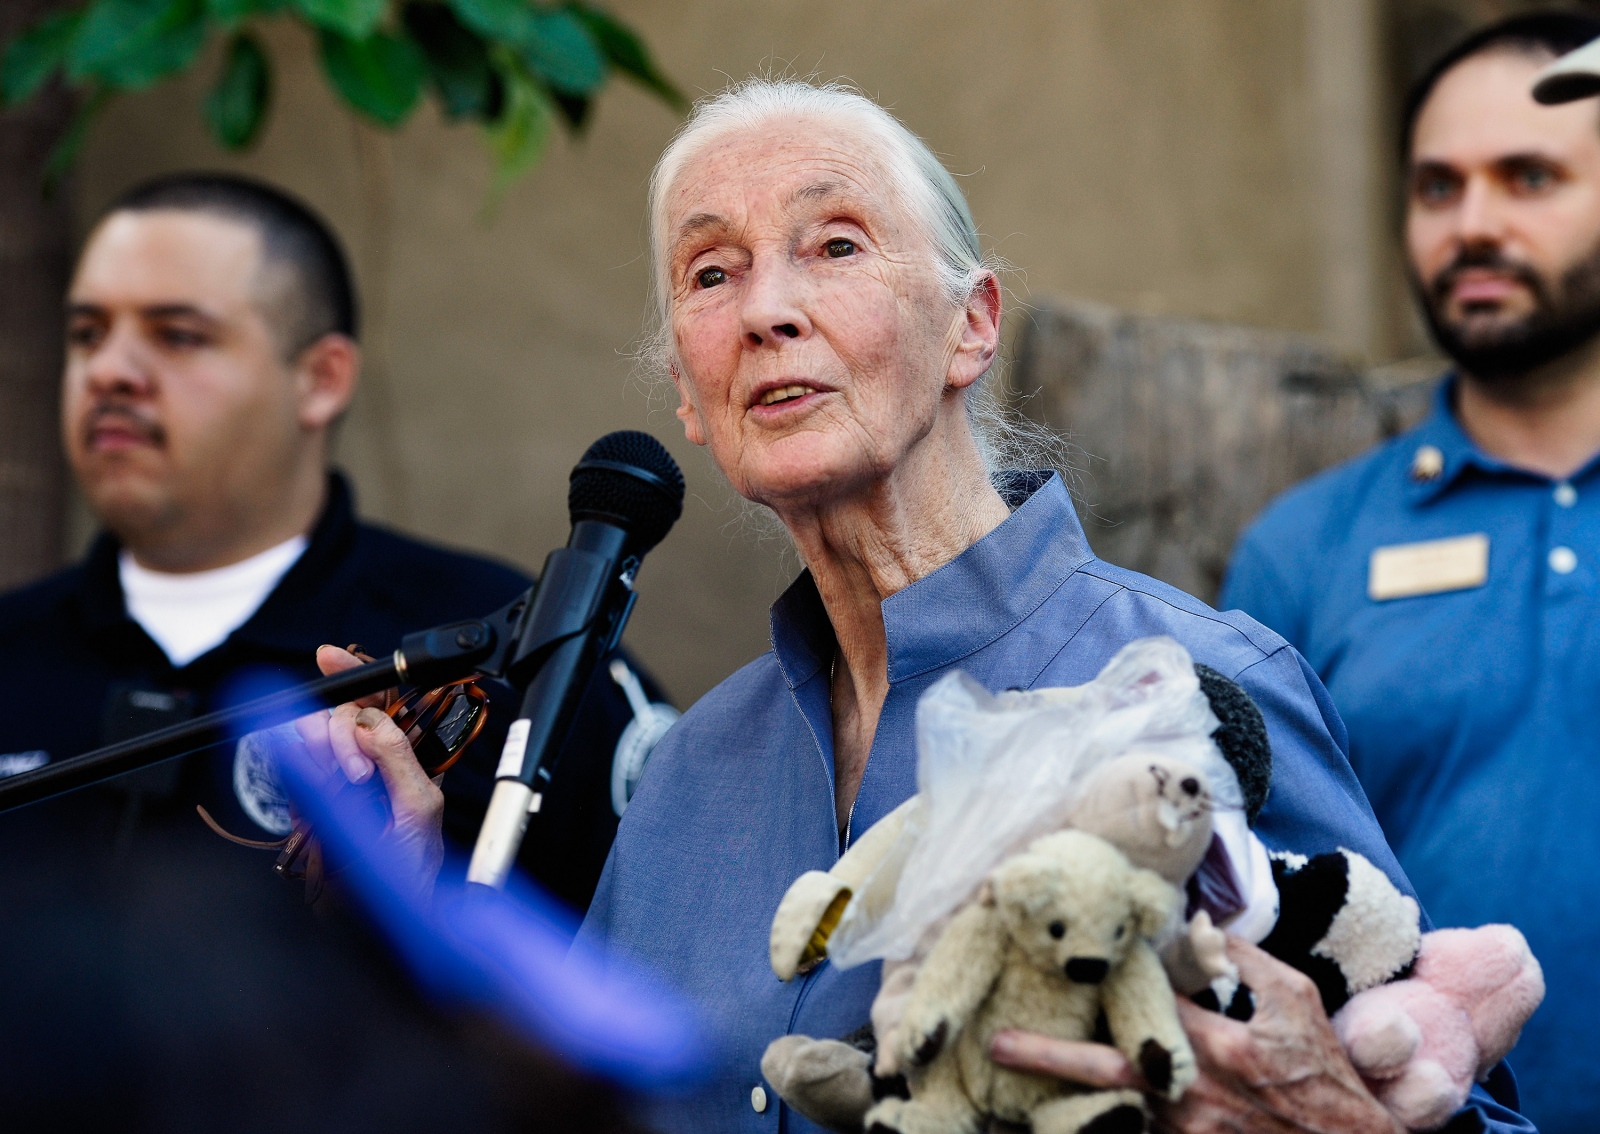 Image from Jane Goodall's Day of Peace